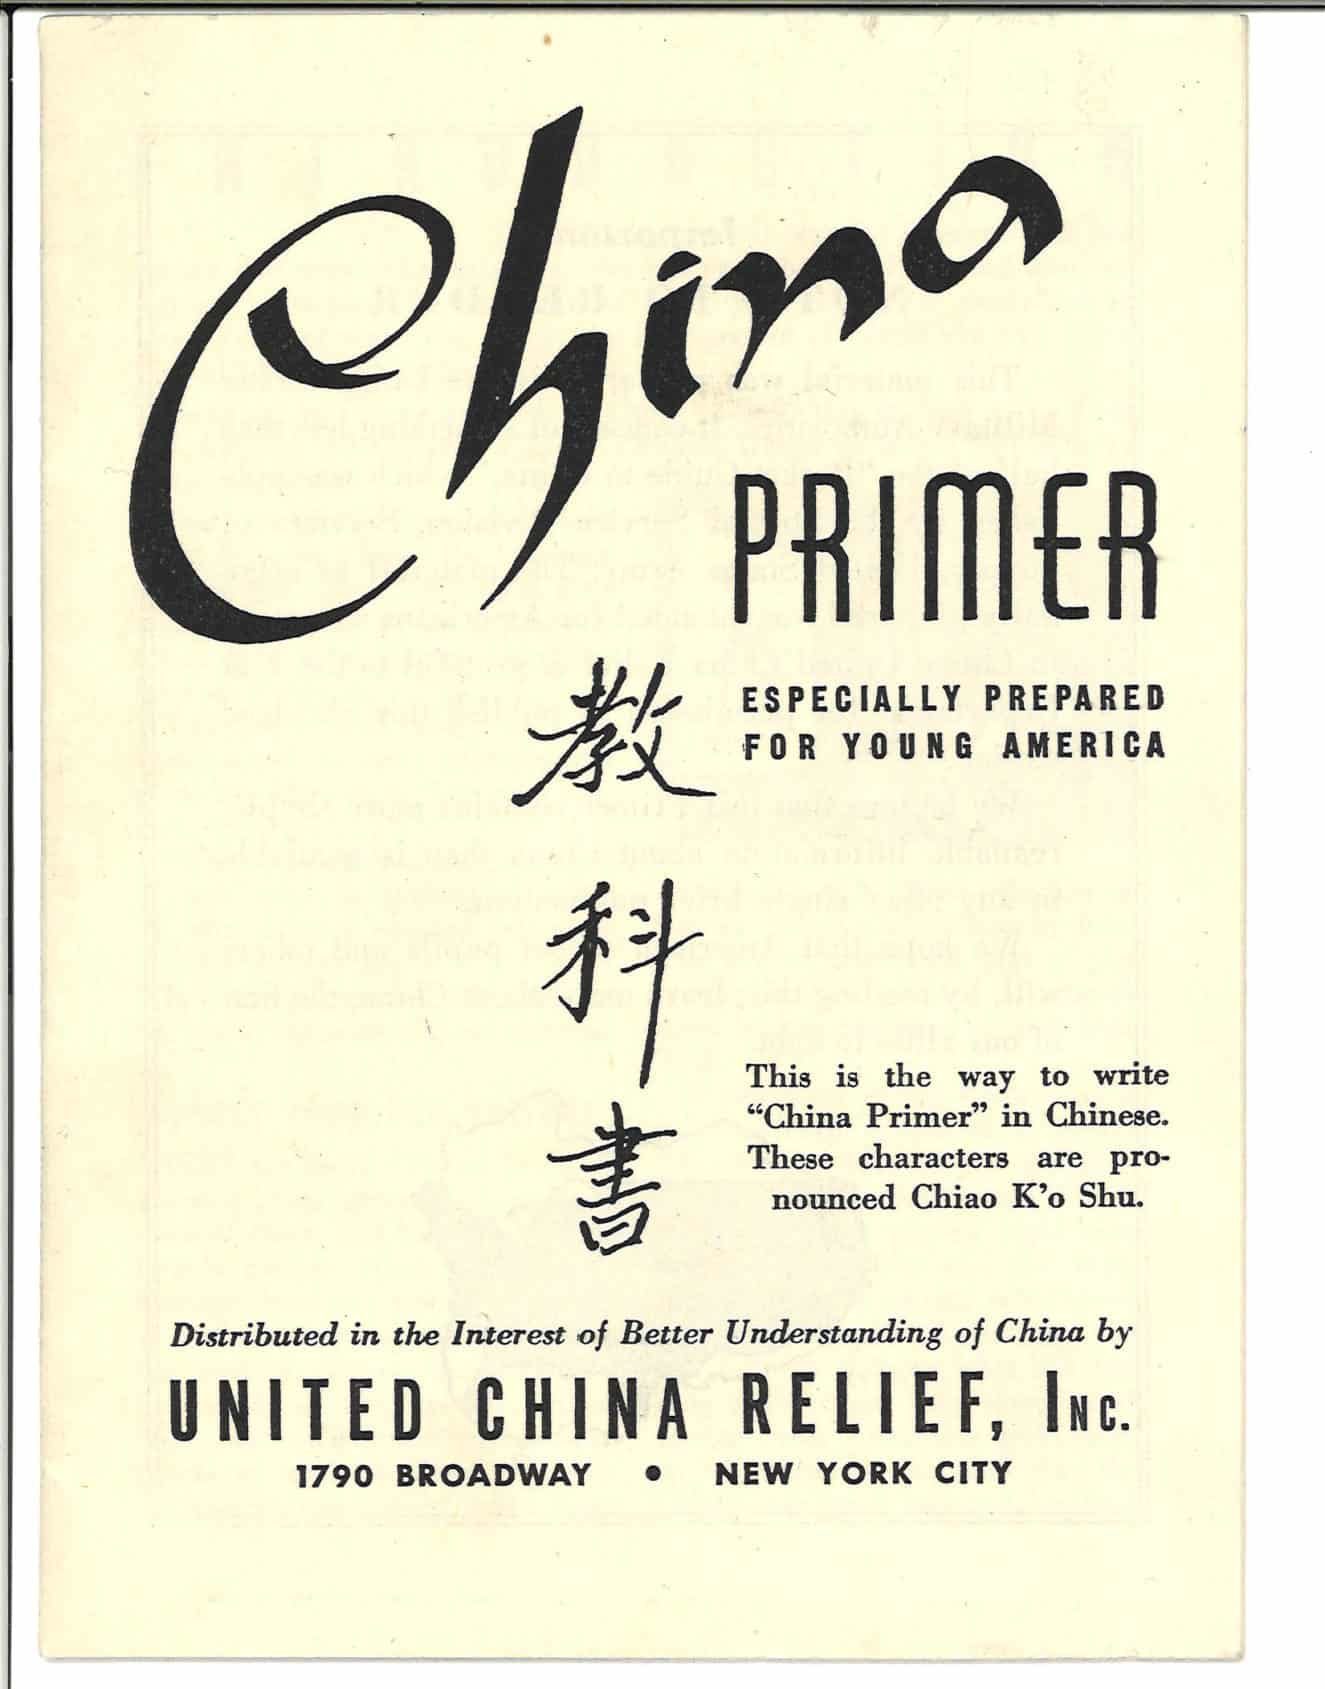 China Relief Fund - China Primer, from the Pearl S. Buck International Archives